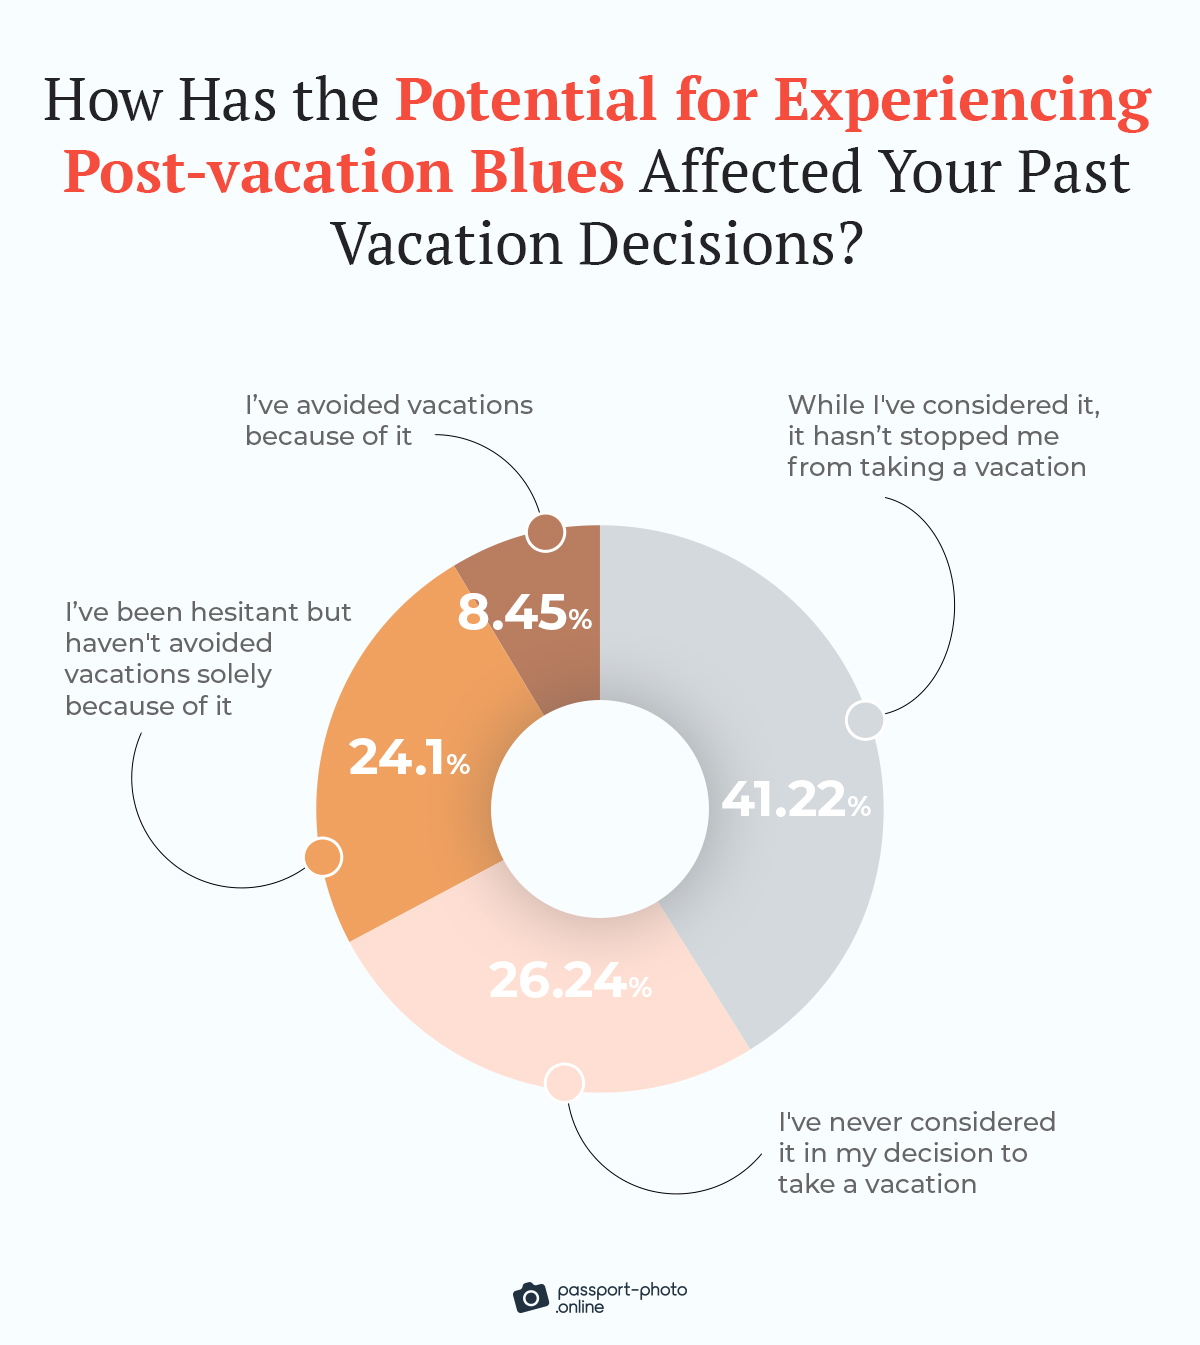 The influence of post-vacation blues on vacation decisions